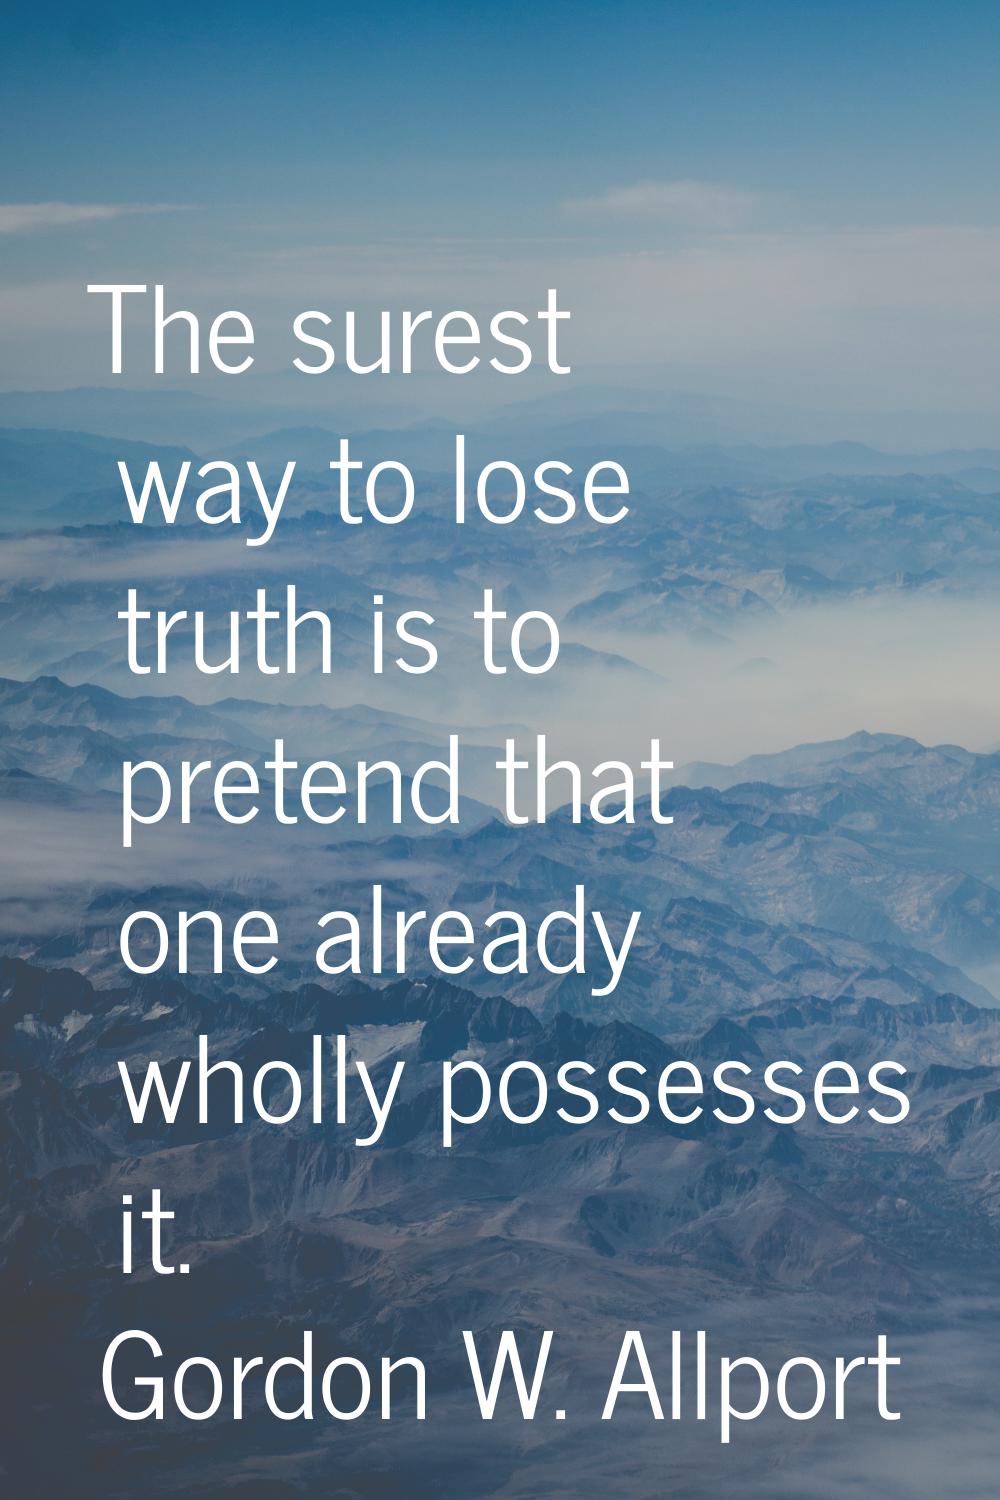 The surest way to lose truth is to pretend that one already wholly possesses it.